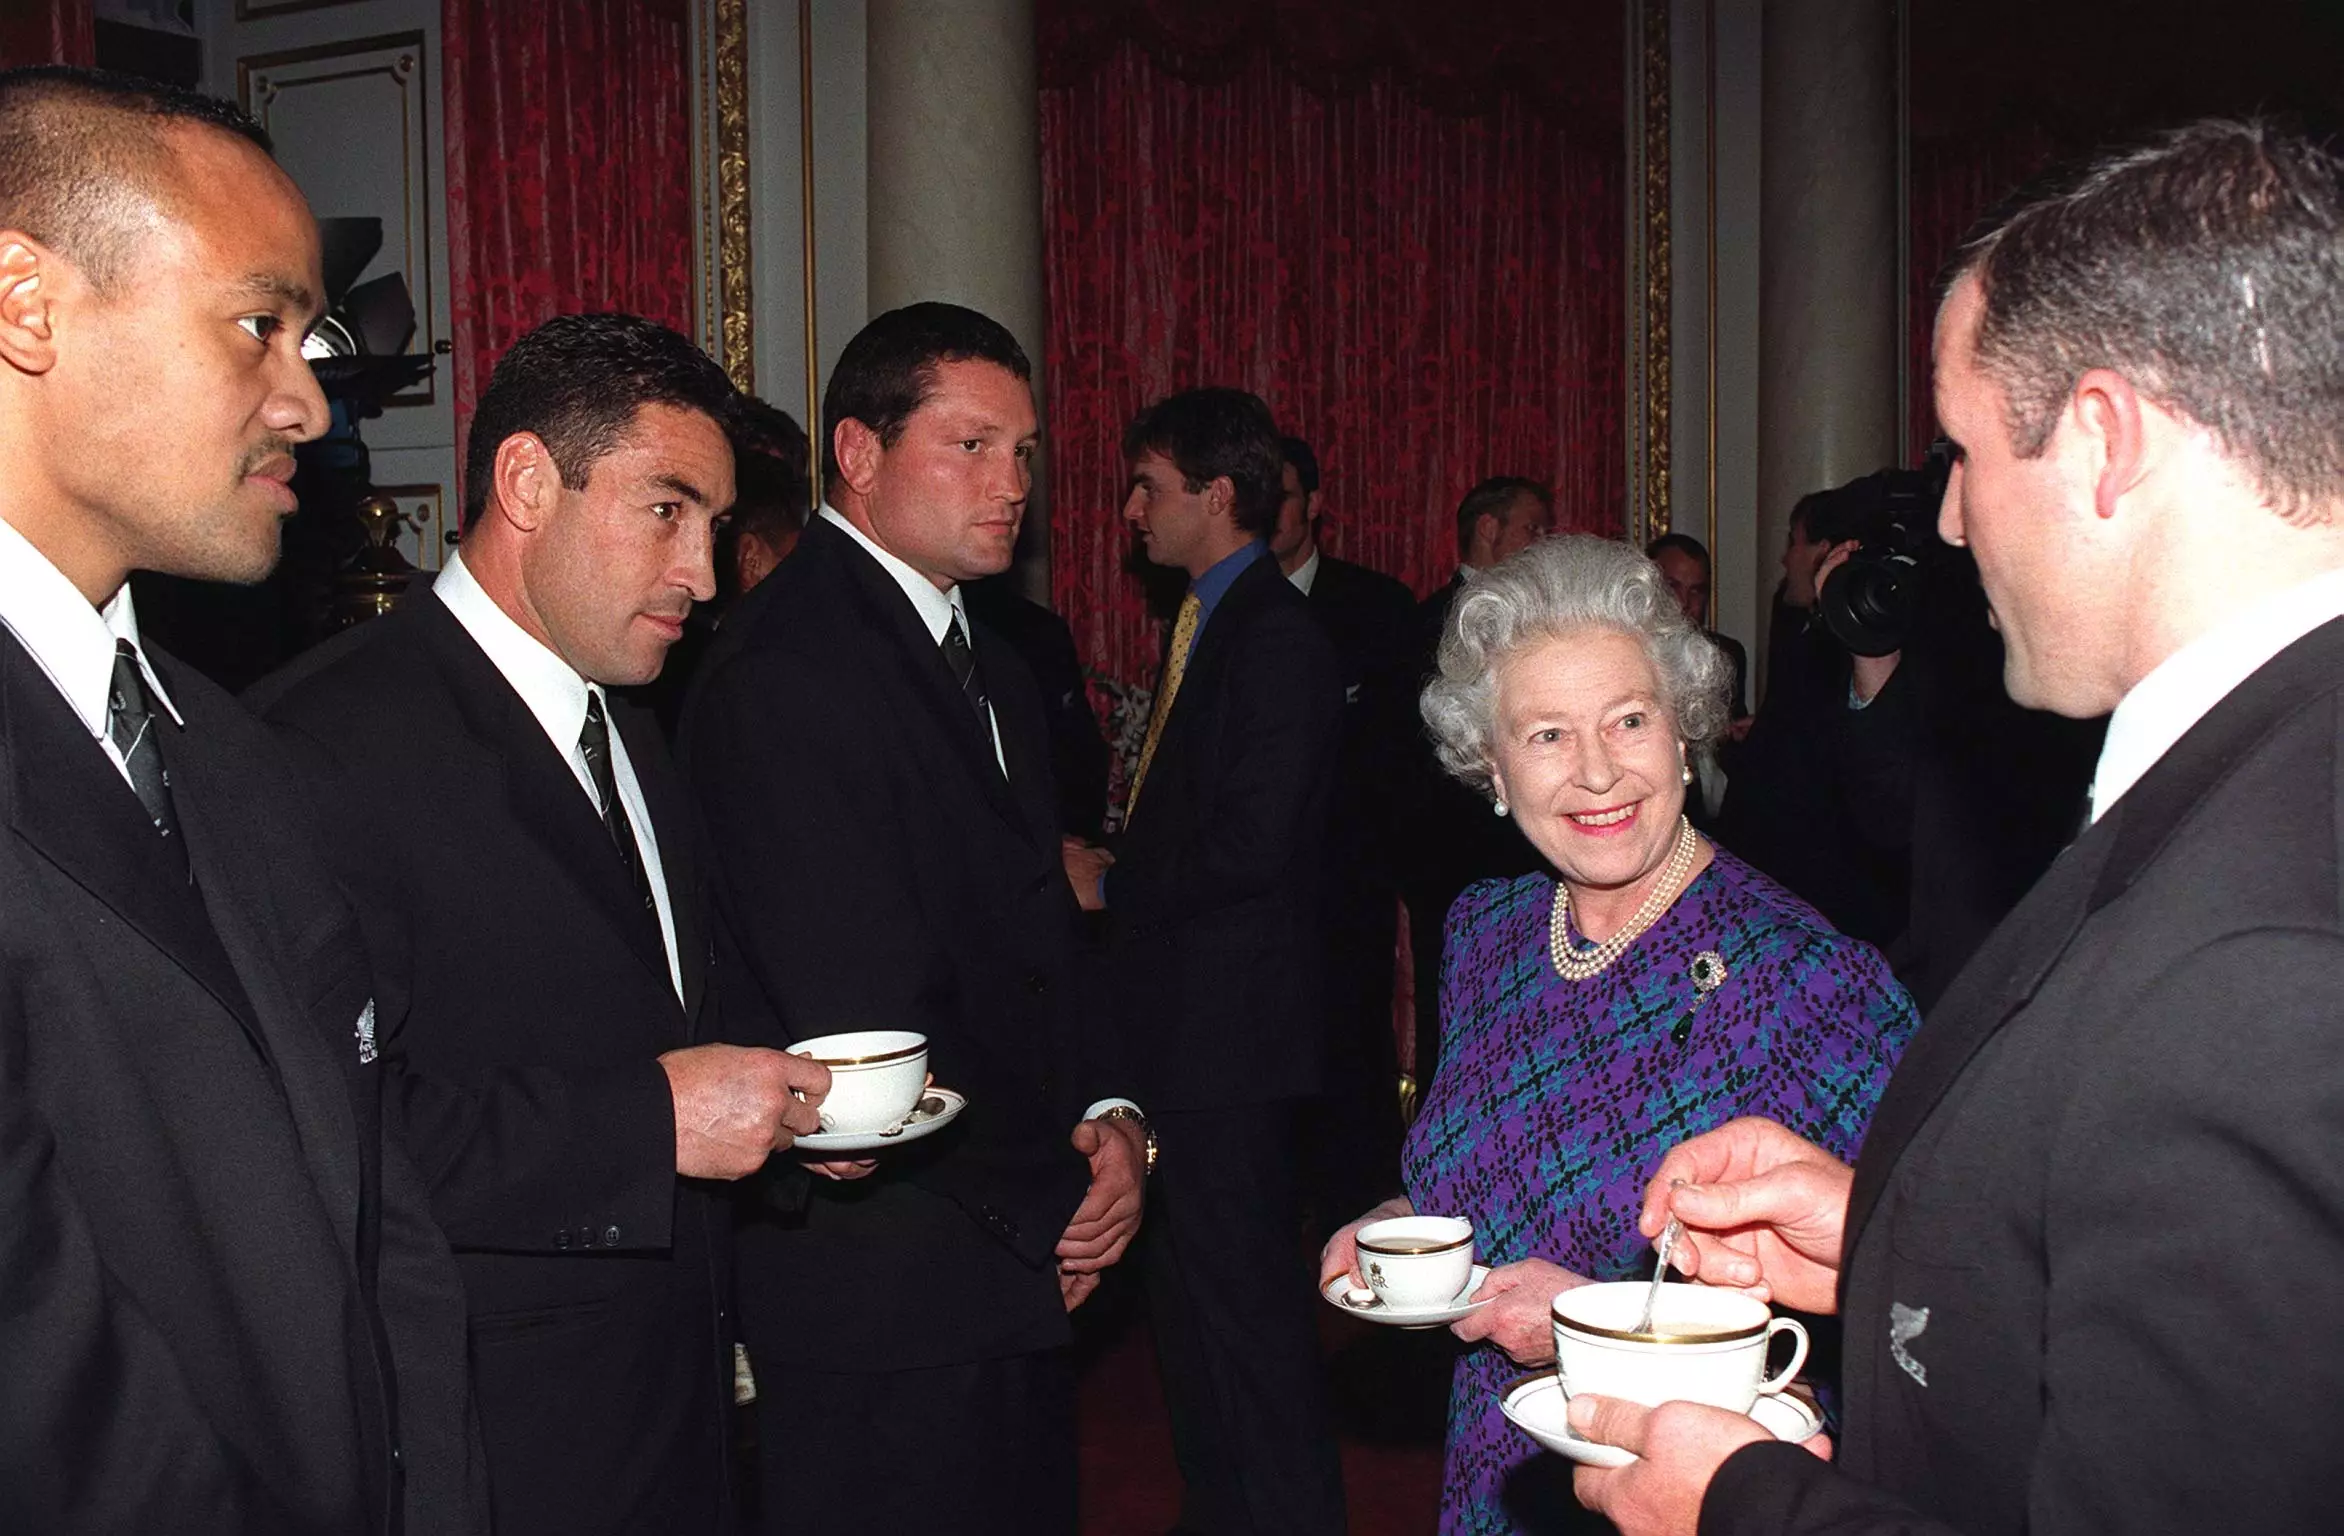 The Queen is rumoured to favour an Earl Grey (